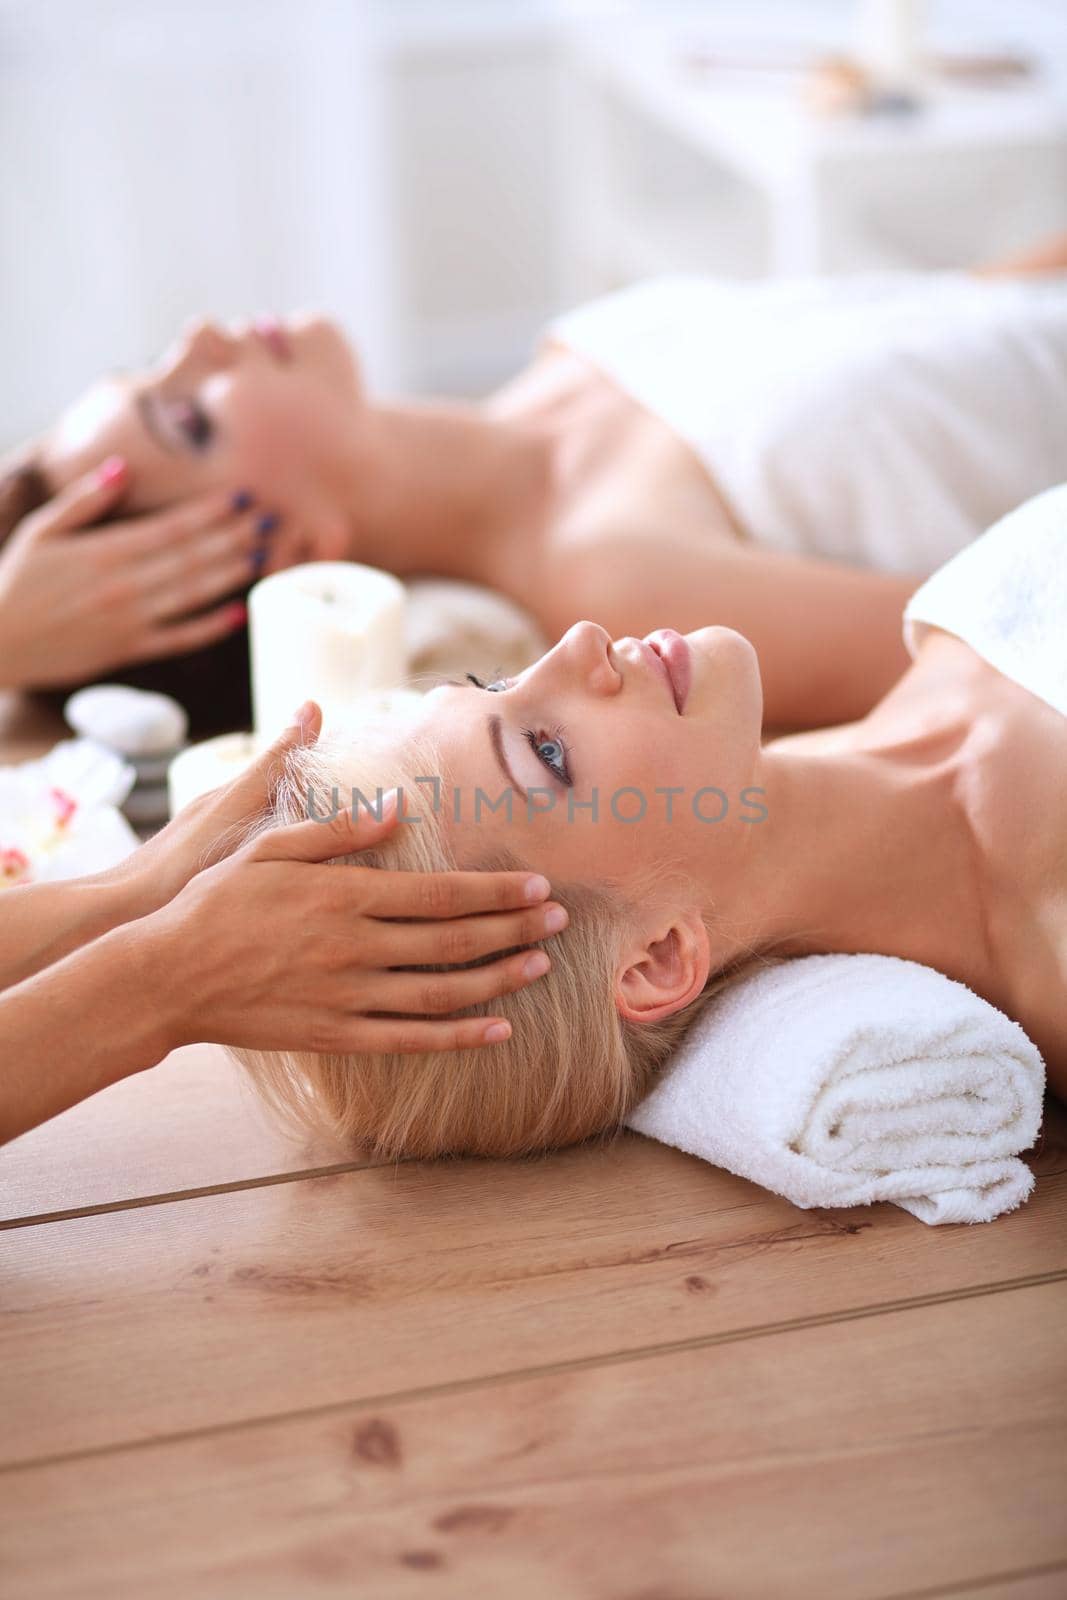 Two young beautiful women relaxing and enjoying at the spa